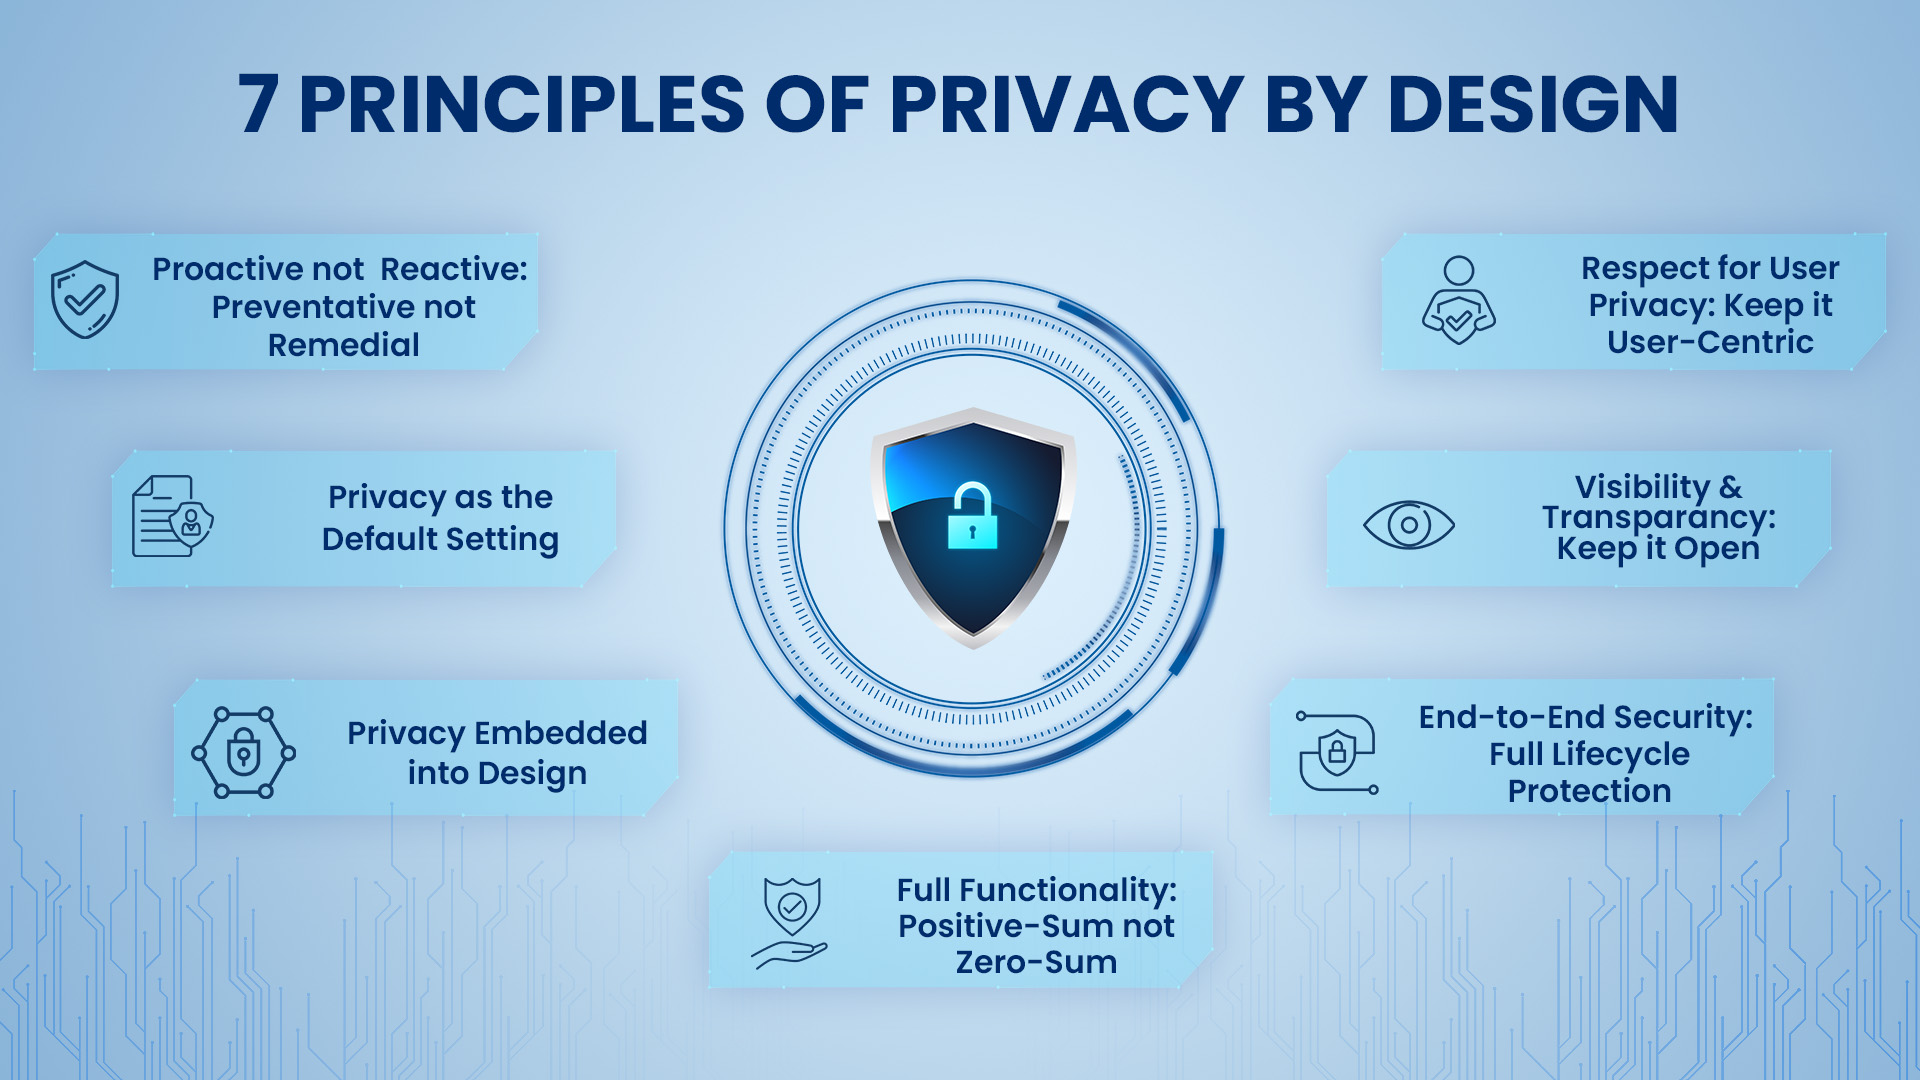 7 Principles of Privacy by Design